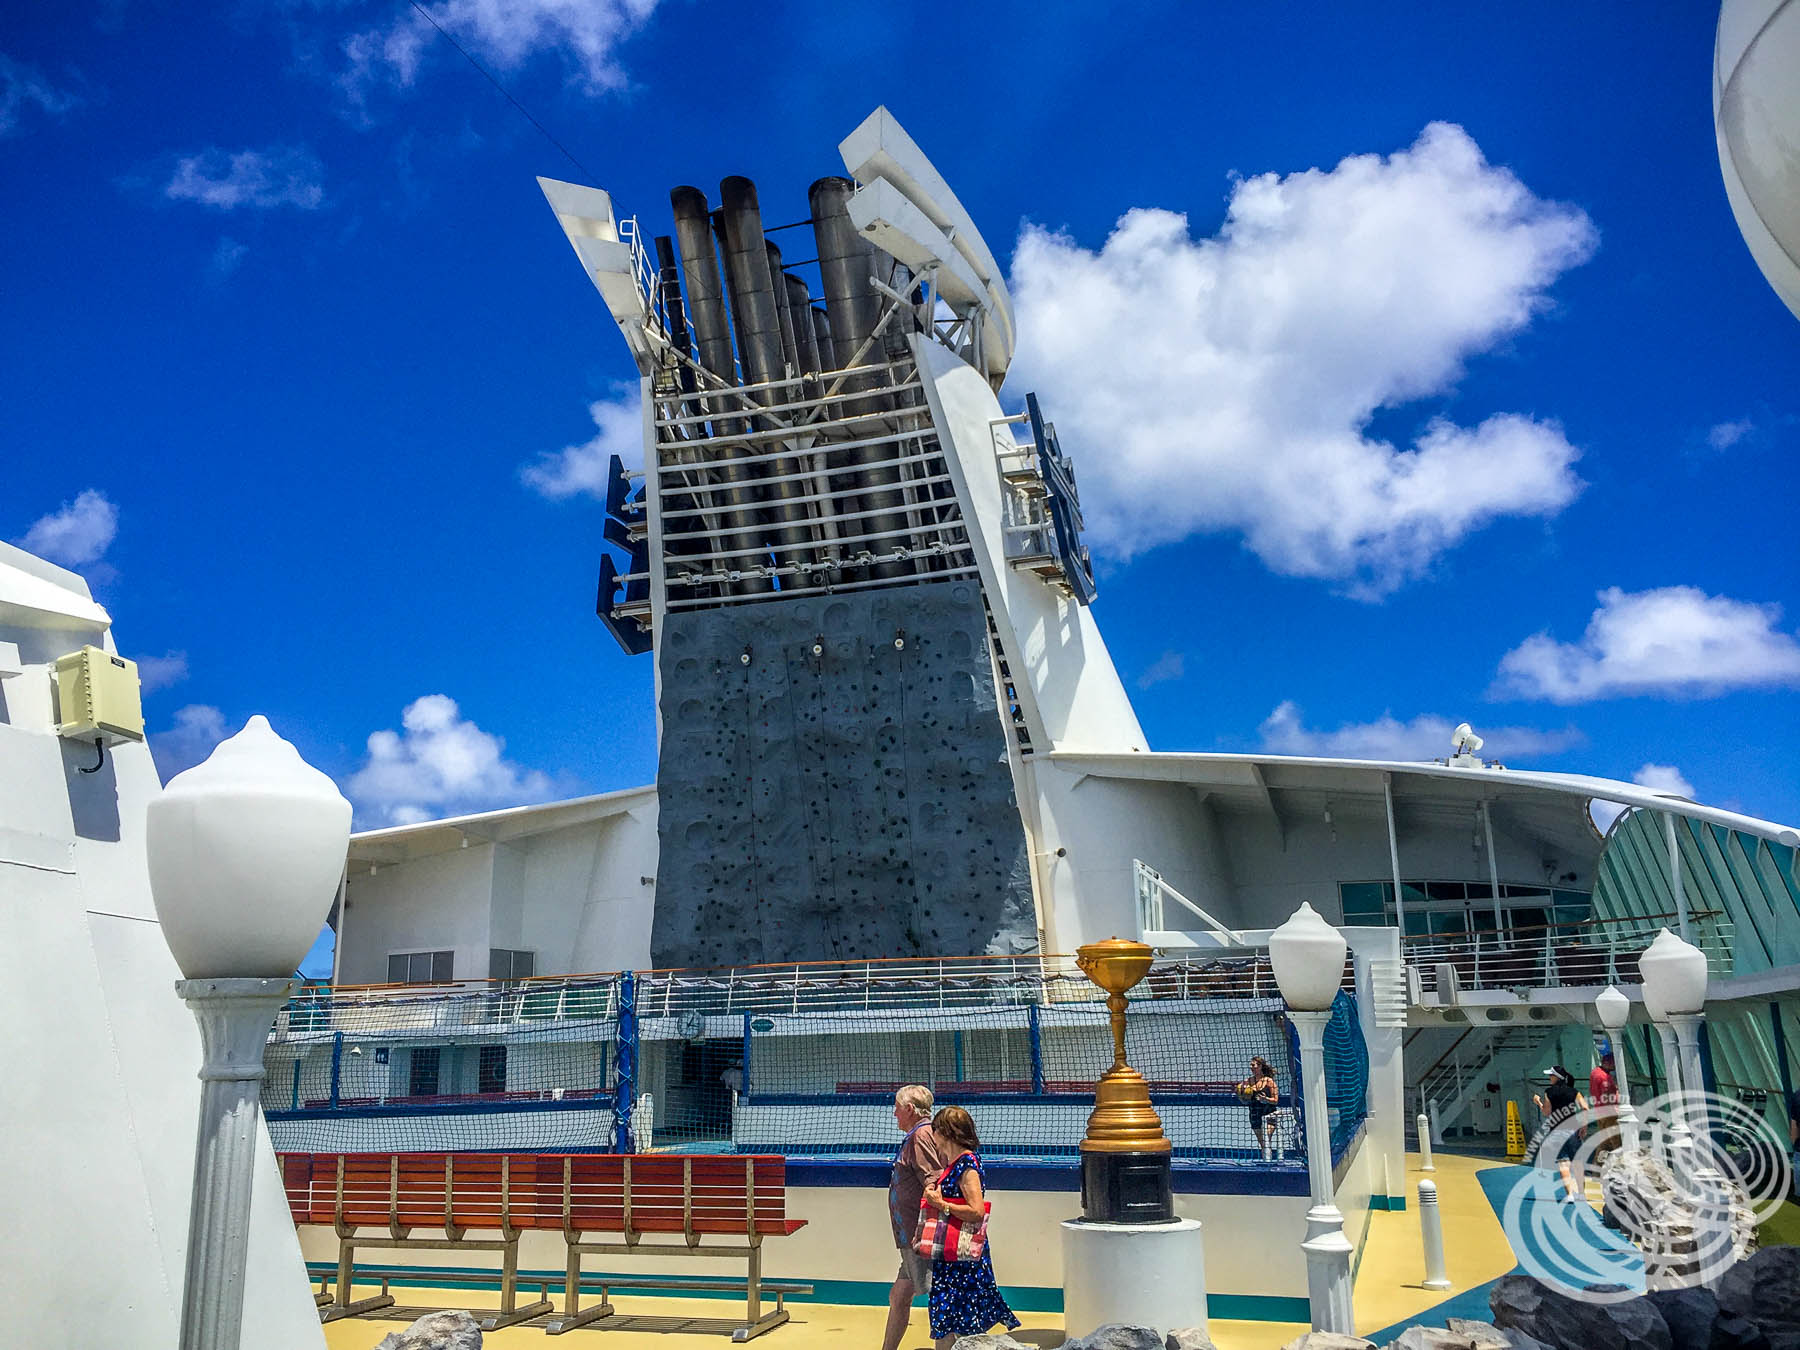 Explorer of the Seas Rock Wall and Sports Court